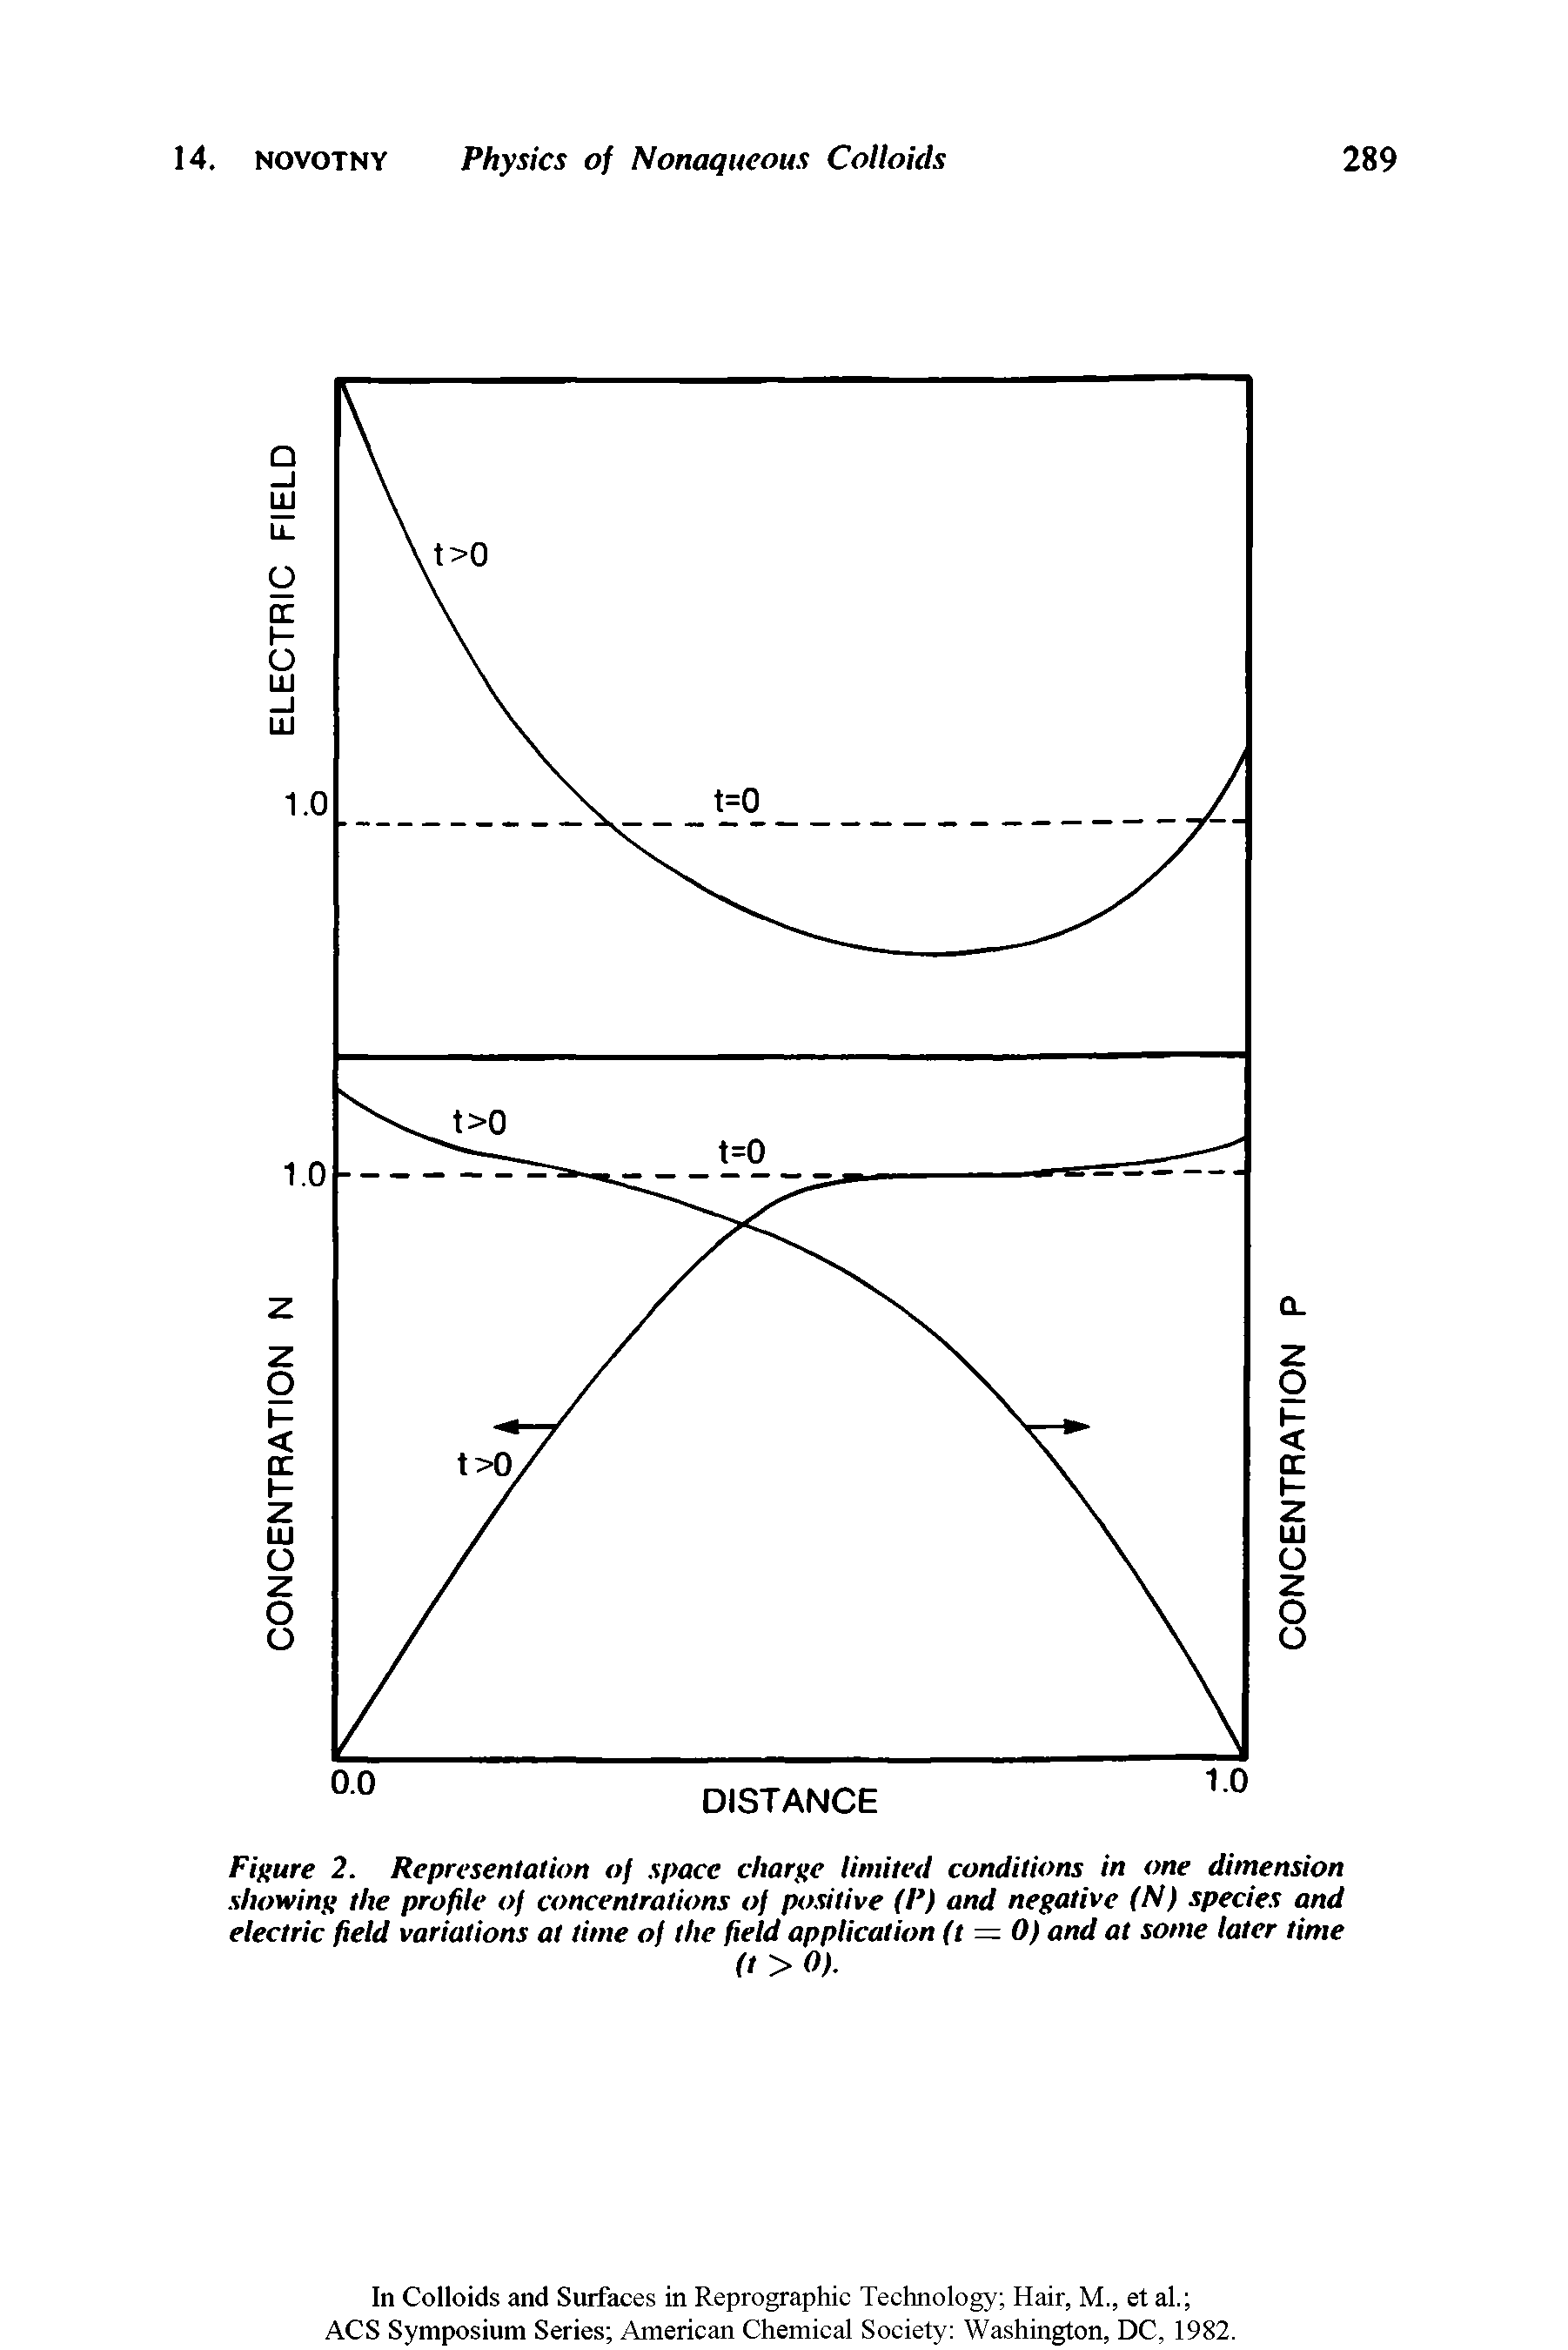 Figure 2. Representation of space charge limited conditions in one dimension showing the profile of concentrations of positive (P) and negative (N) species and electric field variations at time of the field application (t — 0) and at some later time...